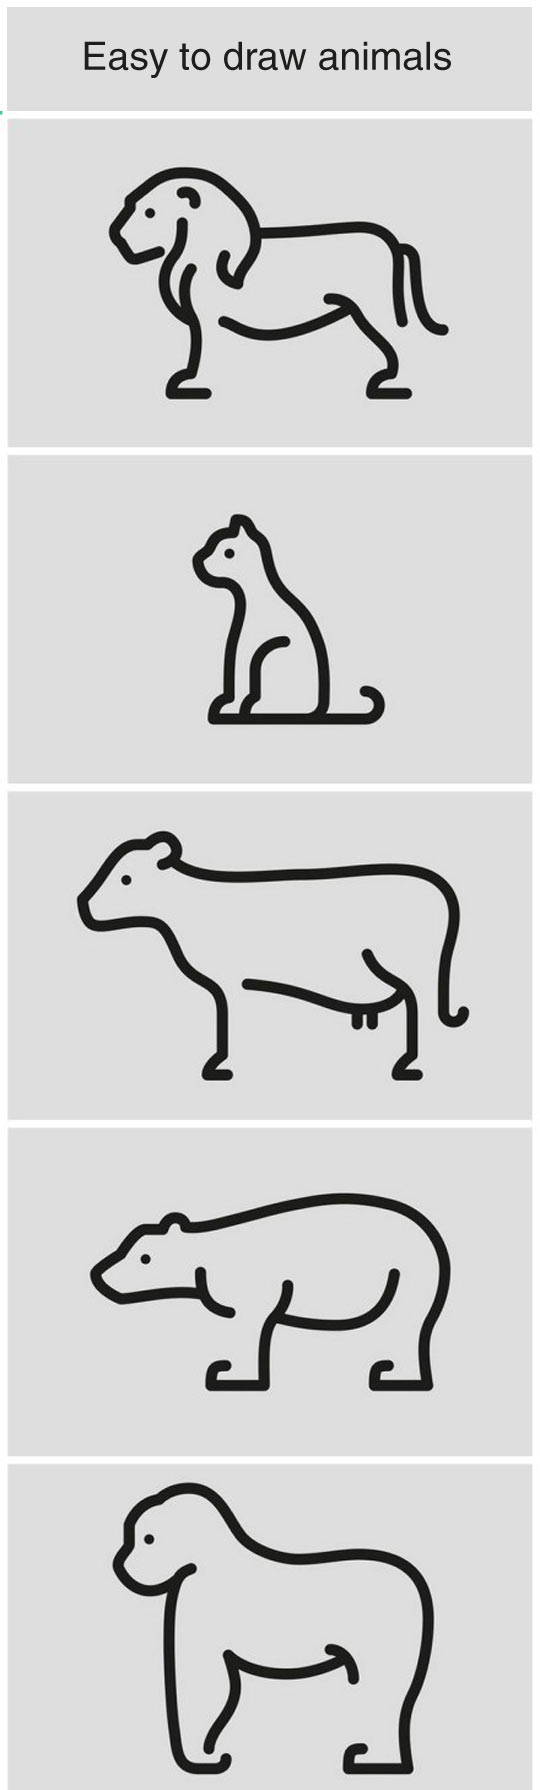 If You Want To Draw Animals This May Work